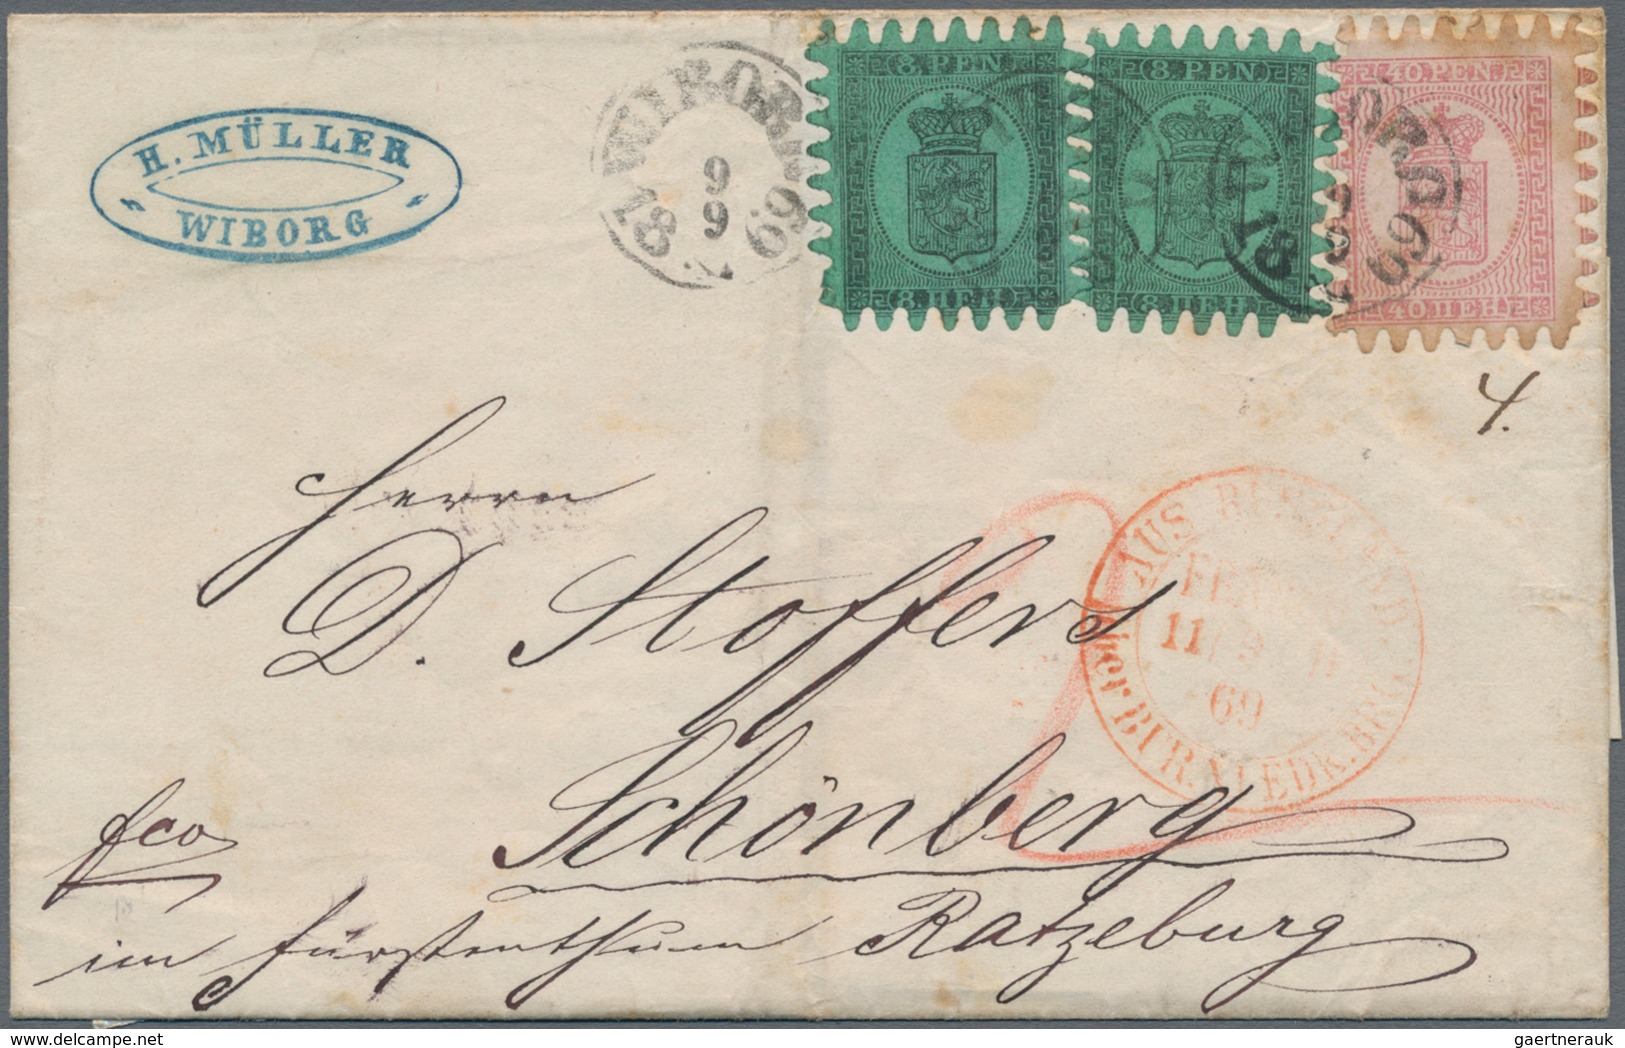 Finnland: 1867, Beautiful Folded Letter Sheet With Two Copies Of 8 Pen And 40 Pen Both Rouletted "C" - Gebruikt